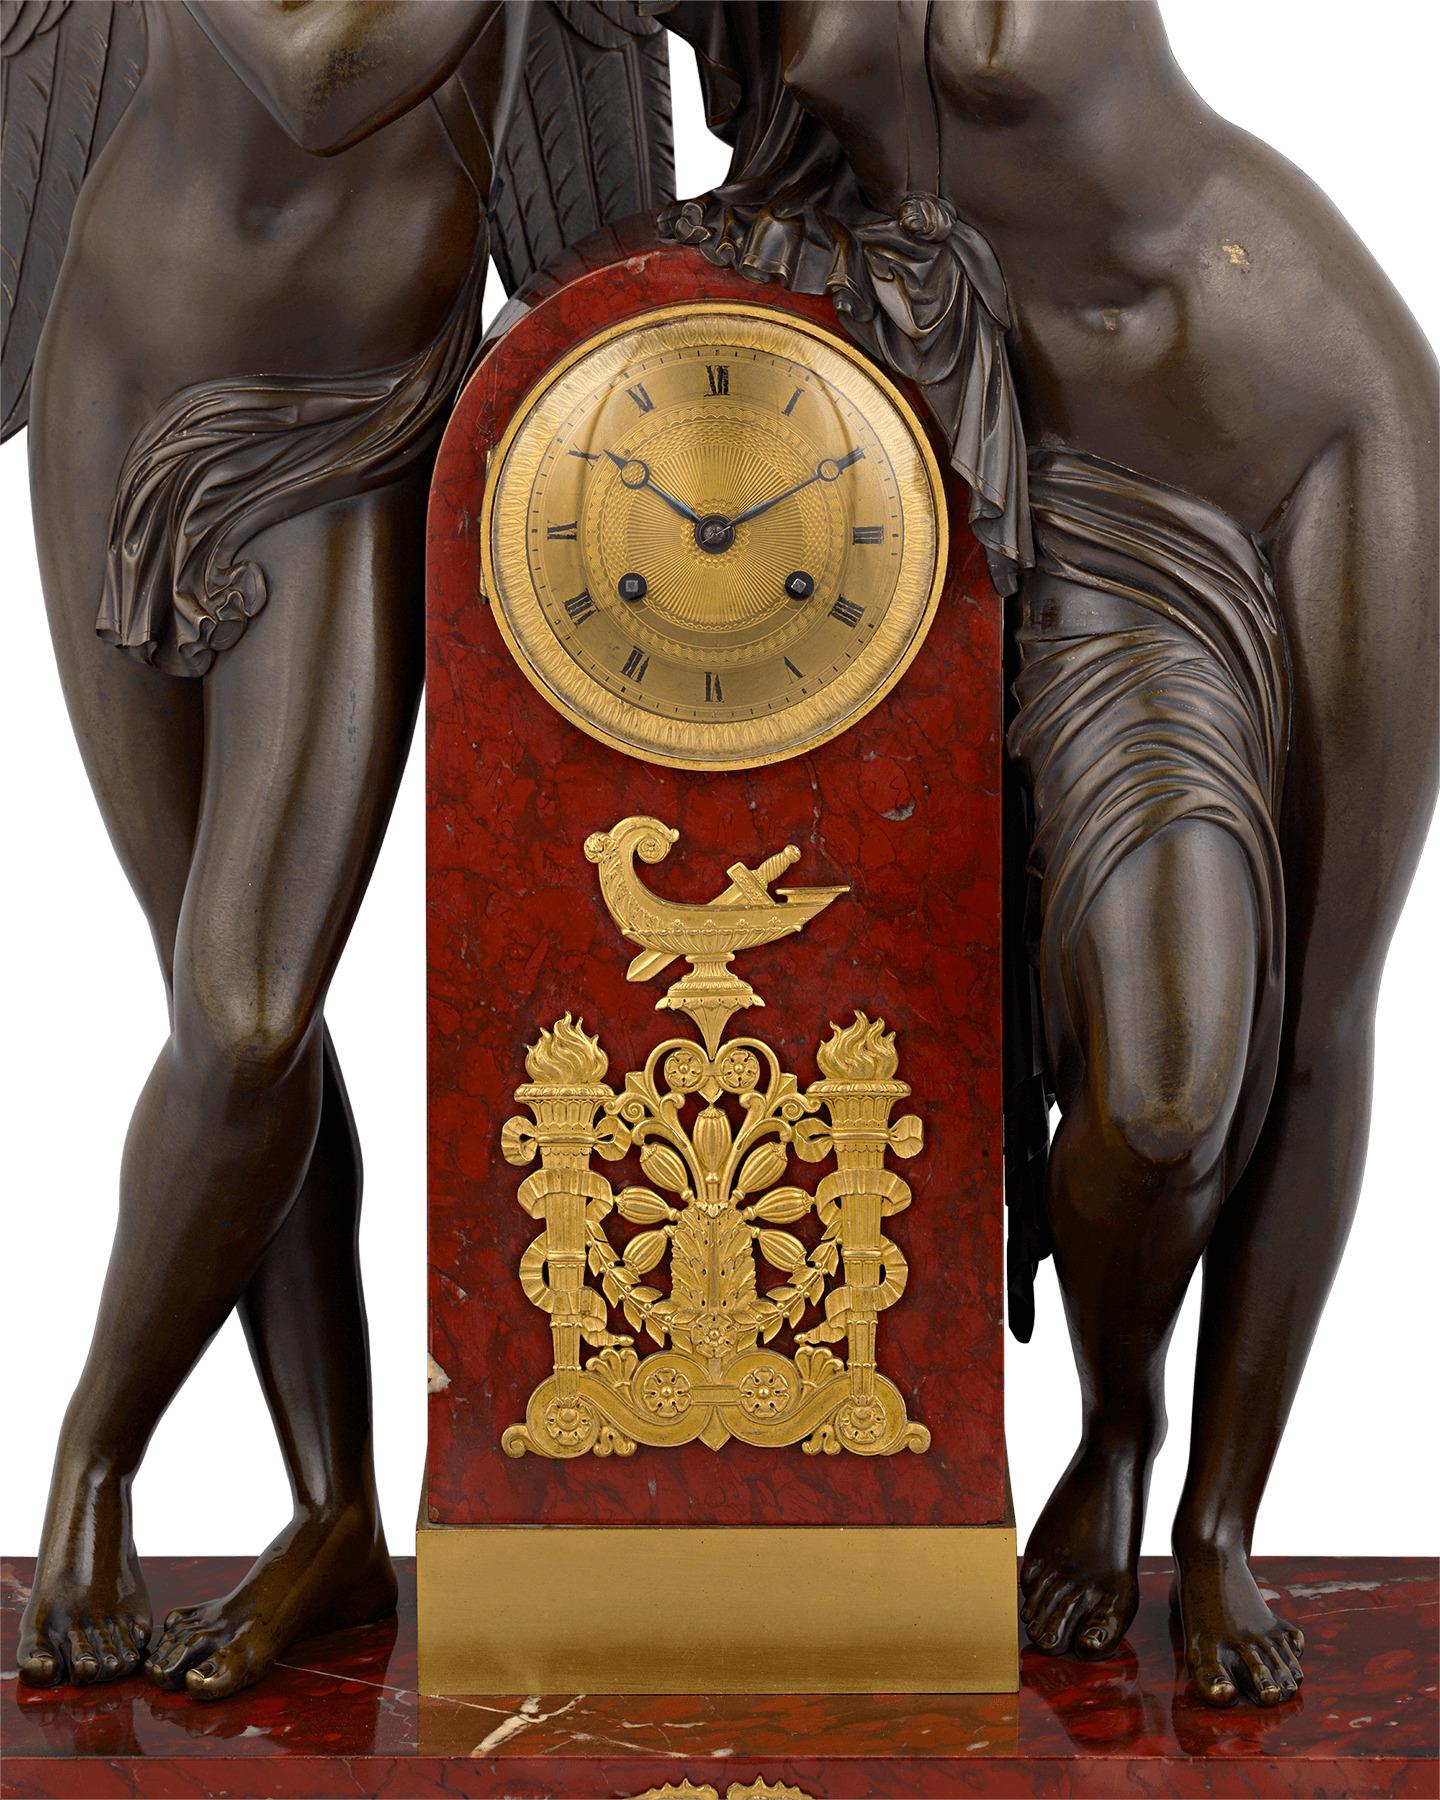 19th Century French Empire-Style Cupid and Psyche Mantel Clock